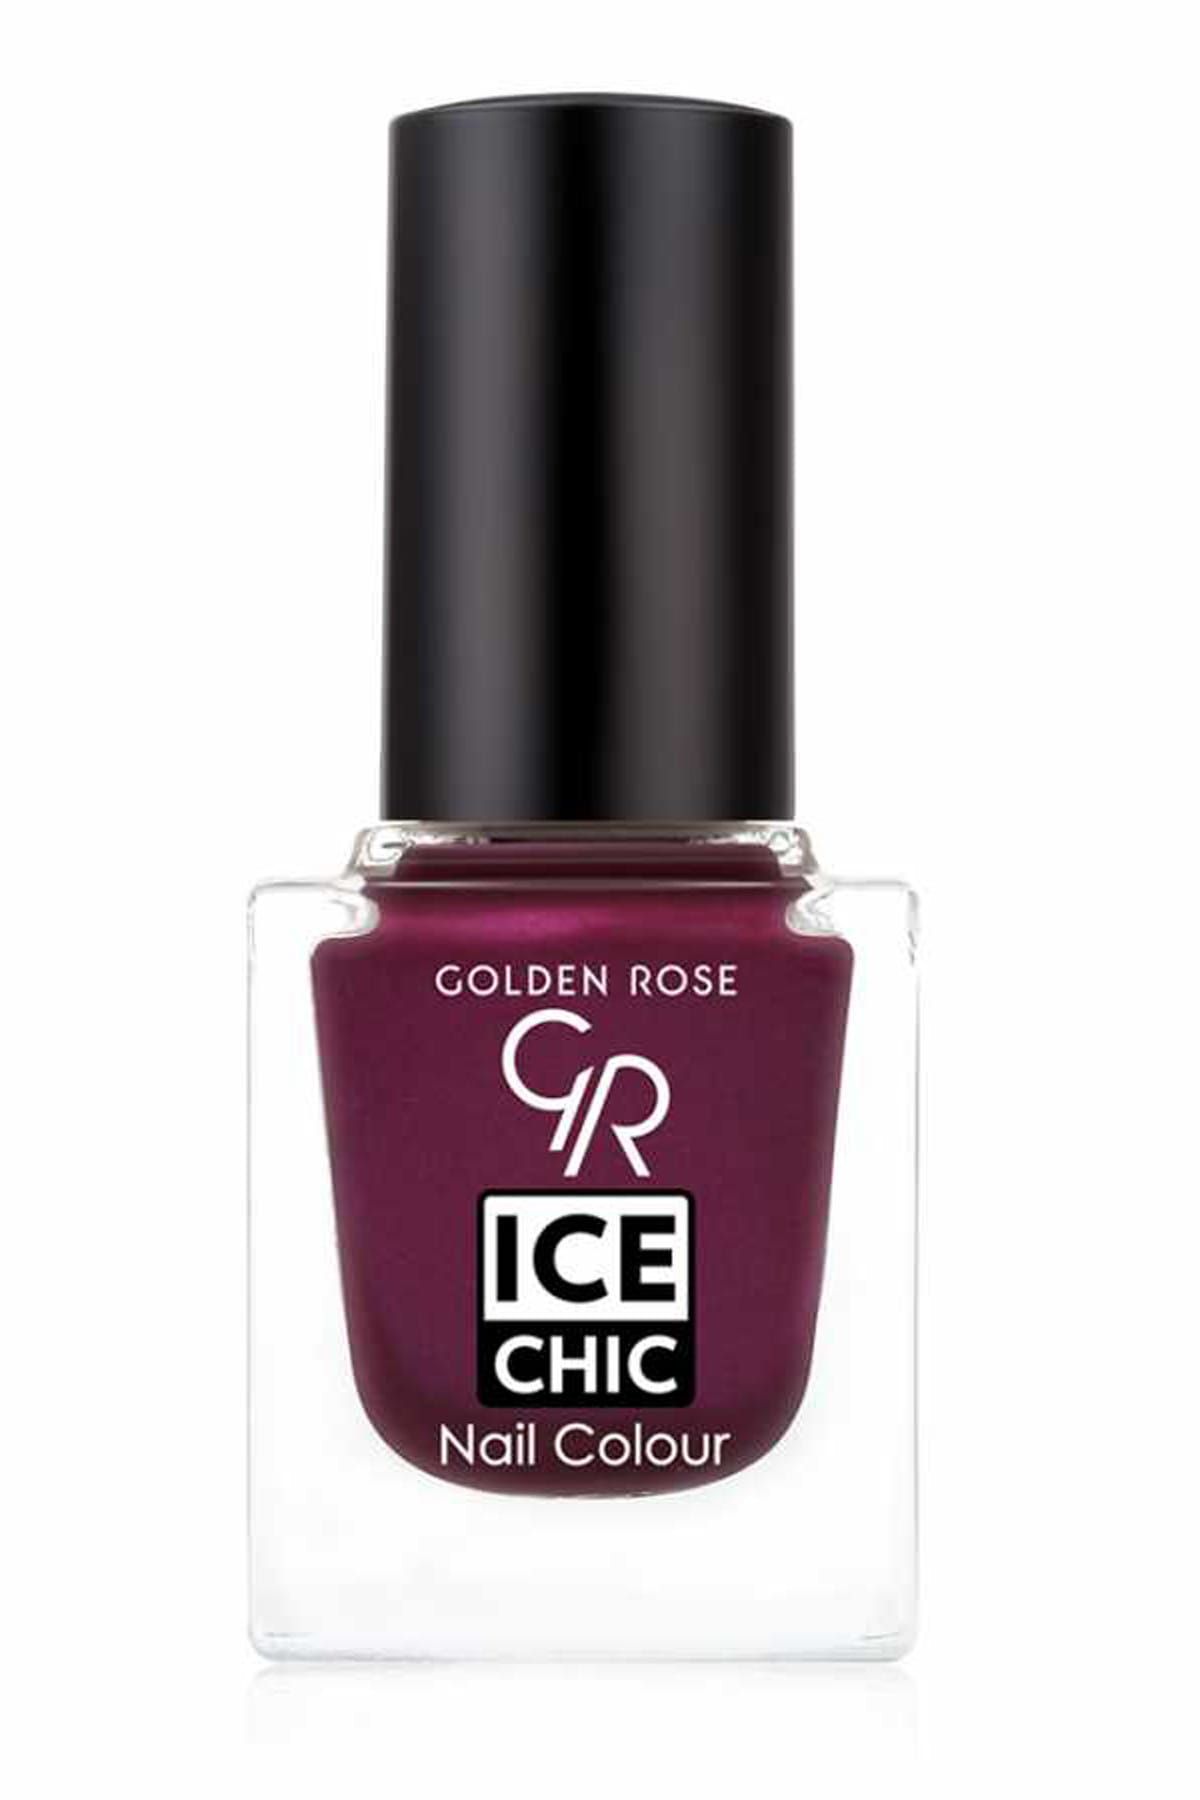 Golden Rose Oje - Ice Chic Nail Colour No: 47 8691190860479